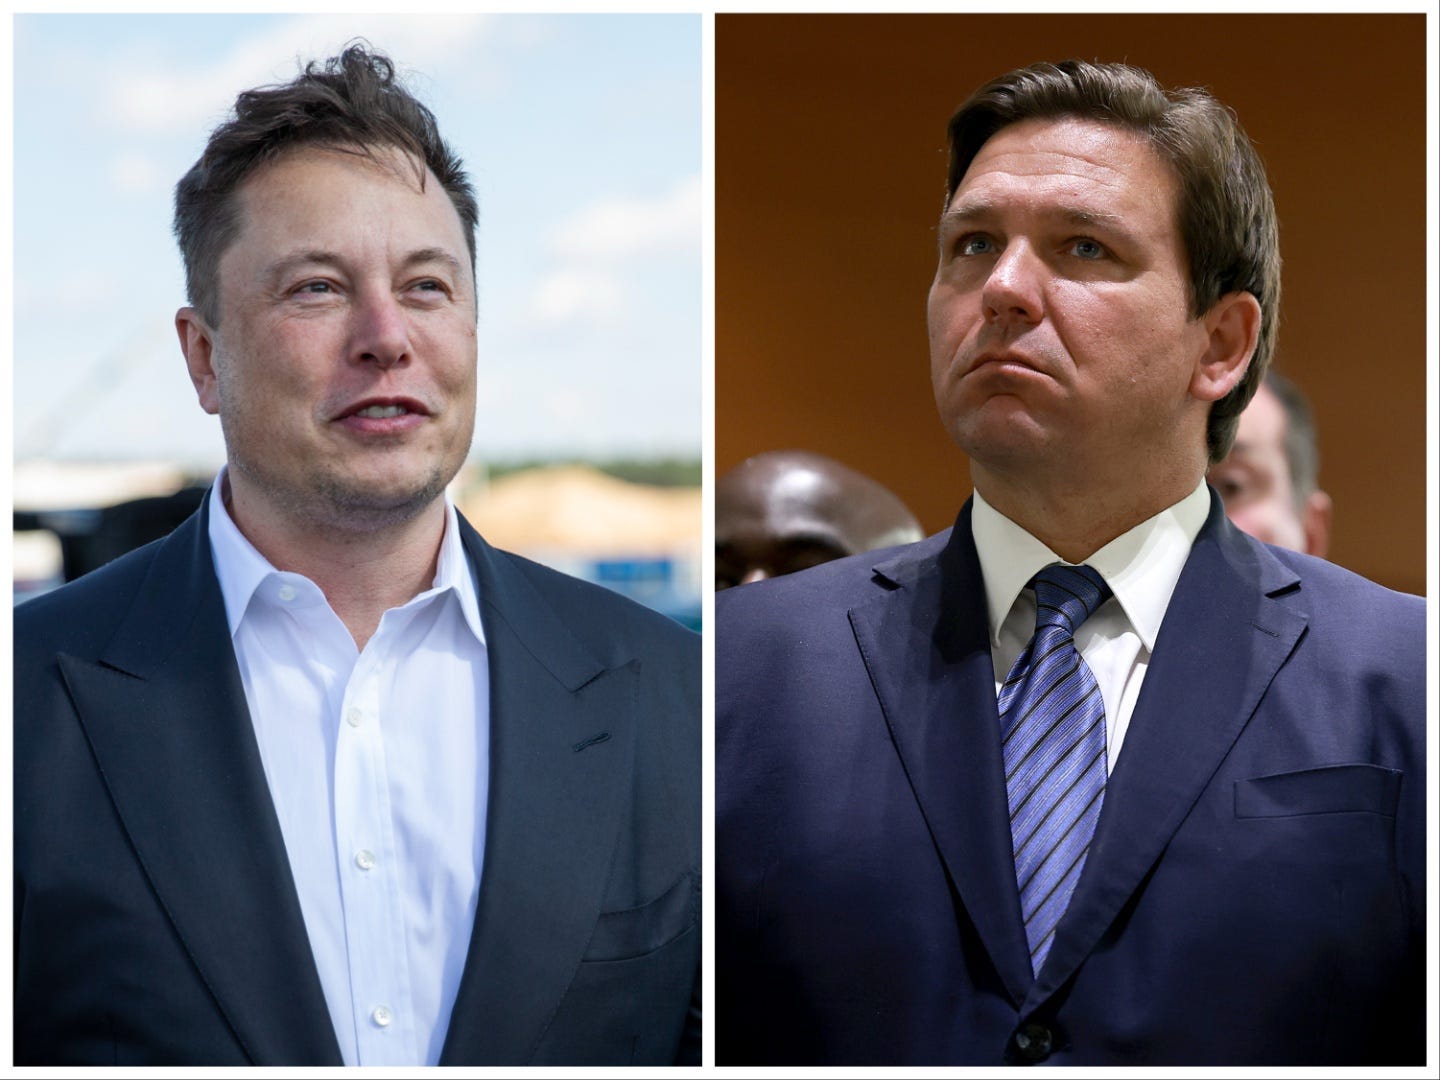 Elon Musk and Ron DeSantis both wear suits, Musk tieless, and look towards the center of the image.